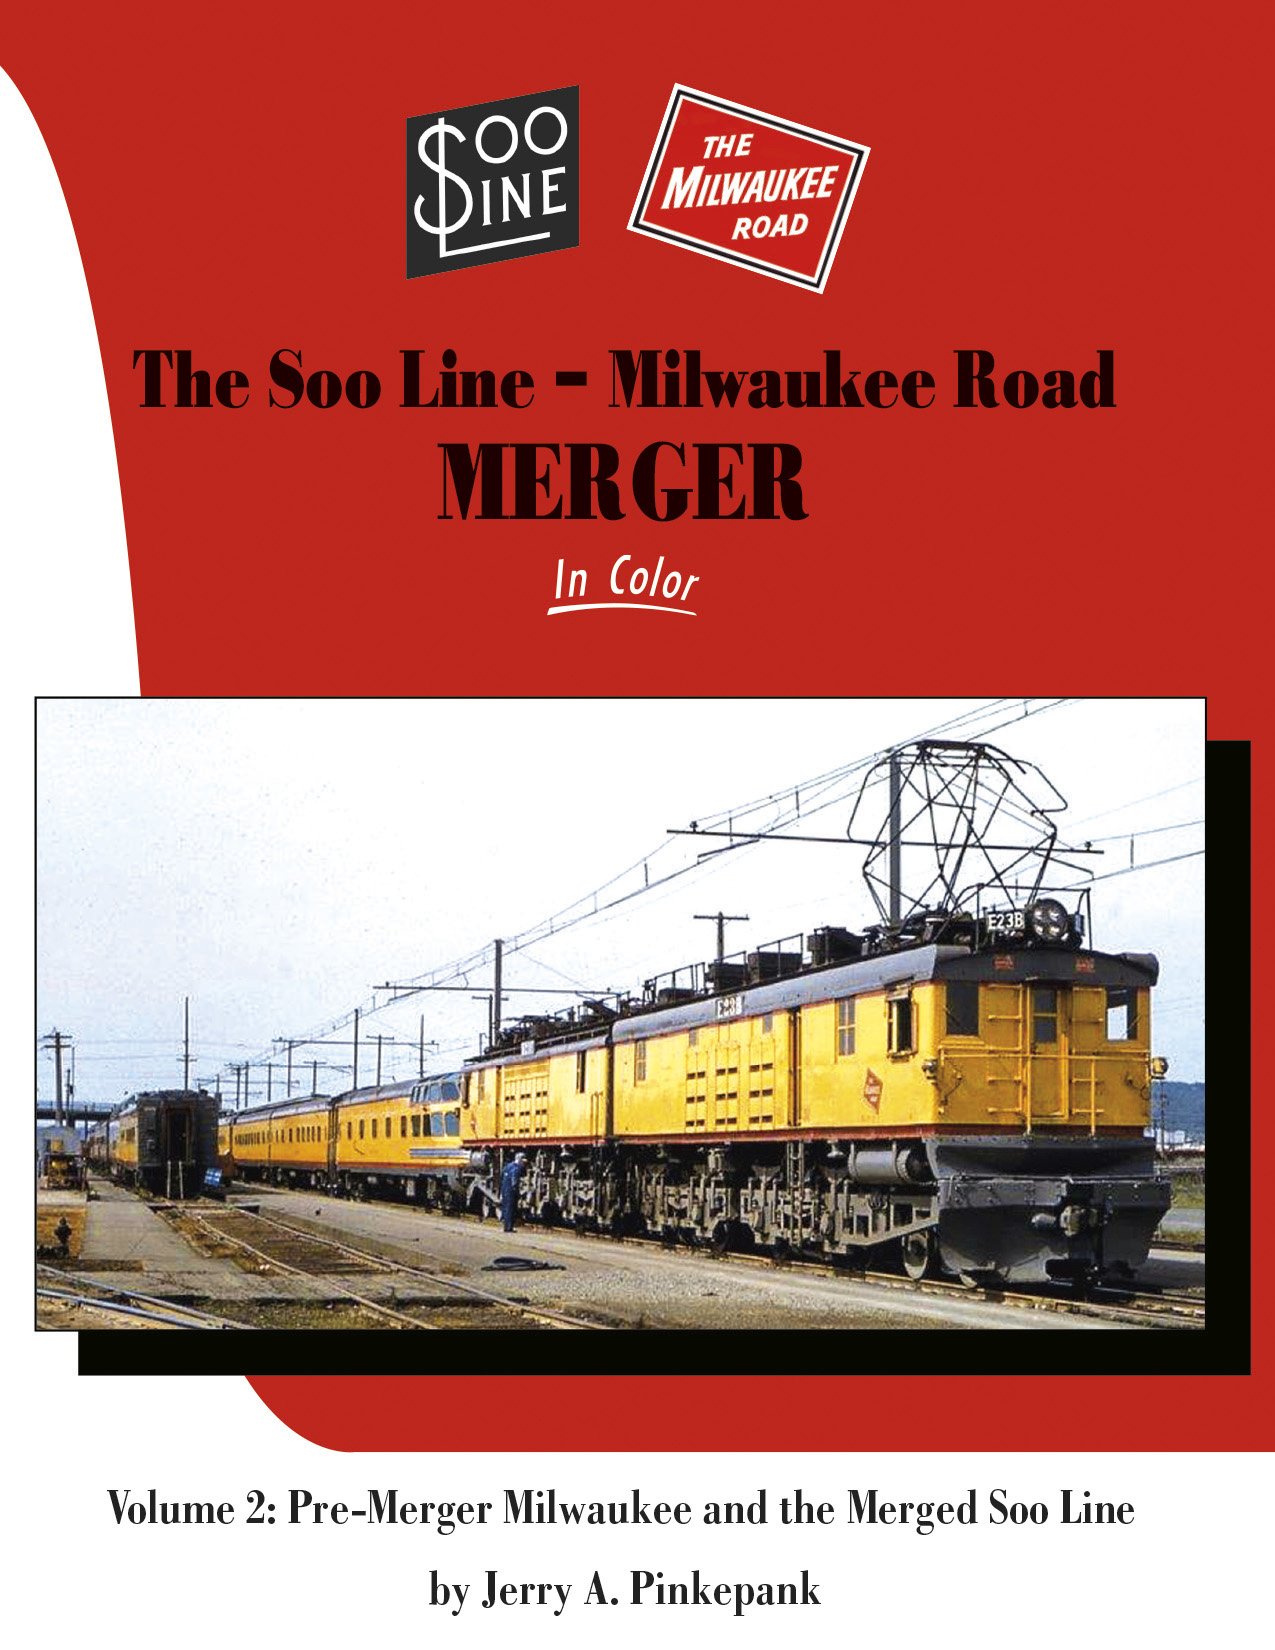 Morning Sun Books 1729 Soo Line-Milwaukee Road Merger In Color Volume 2: More Pre-Merger Milwaukee and the Merged Soo Line